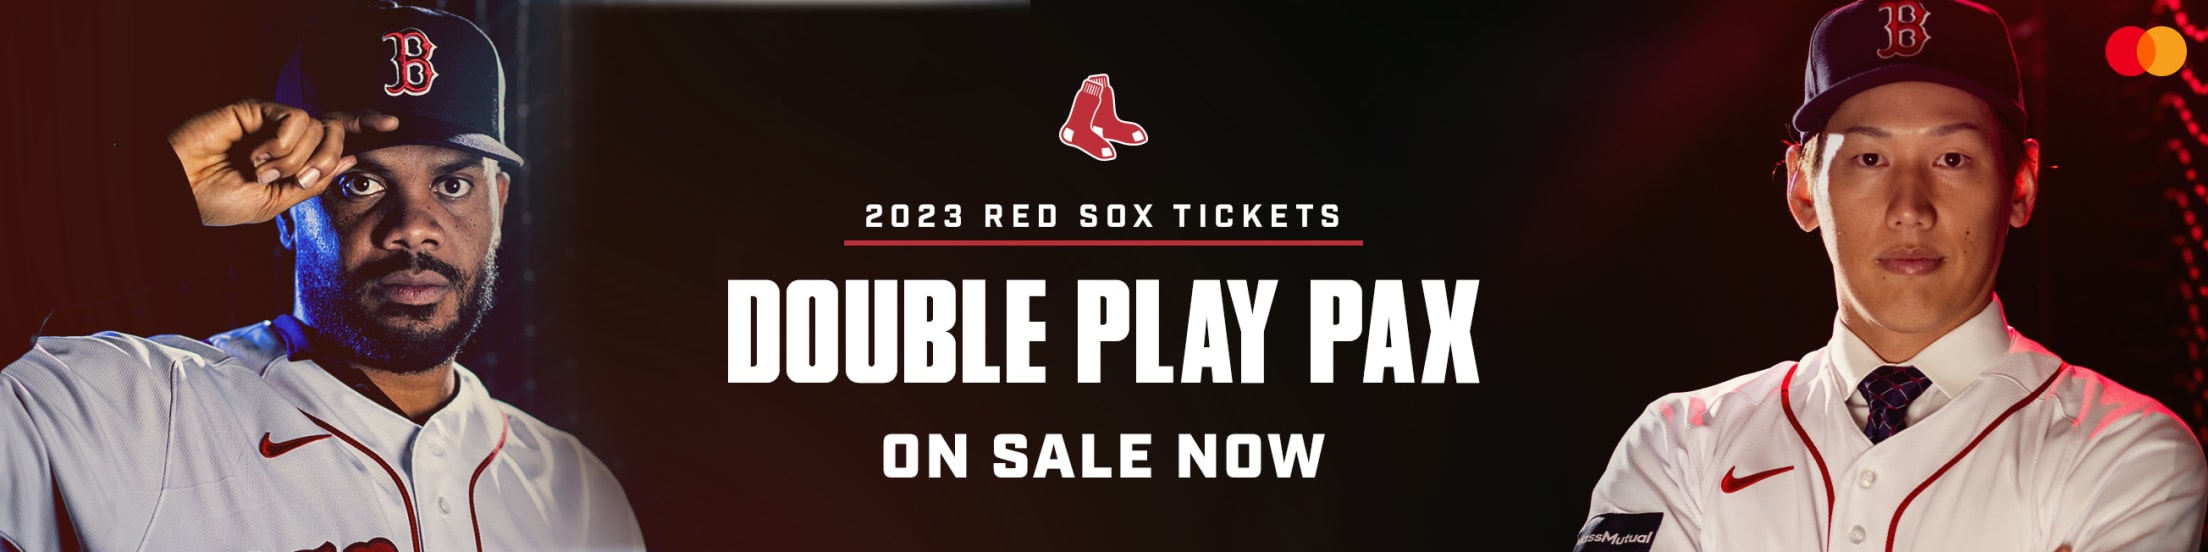 Double Play Pax